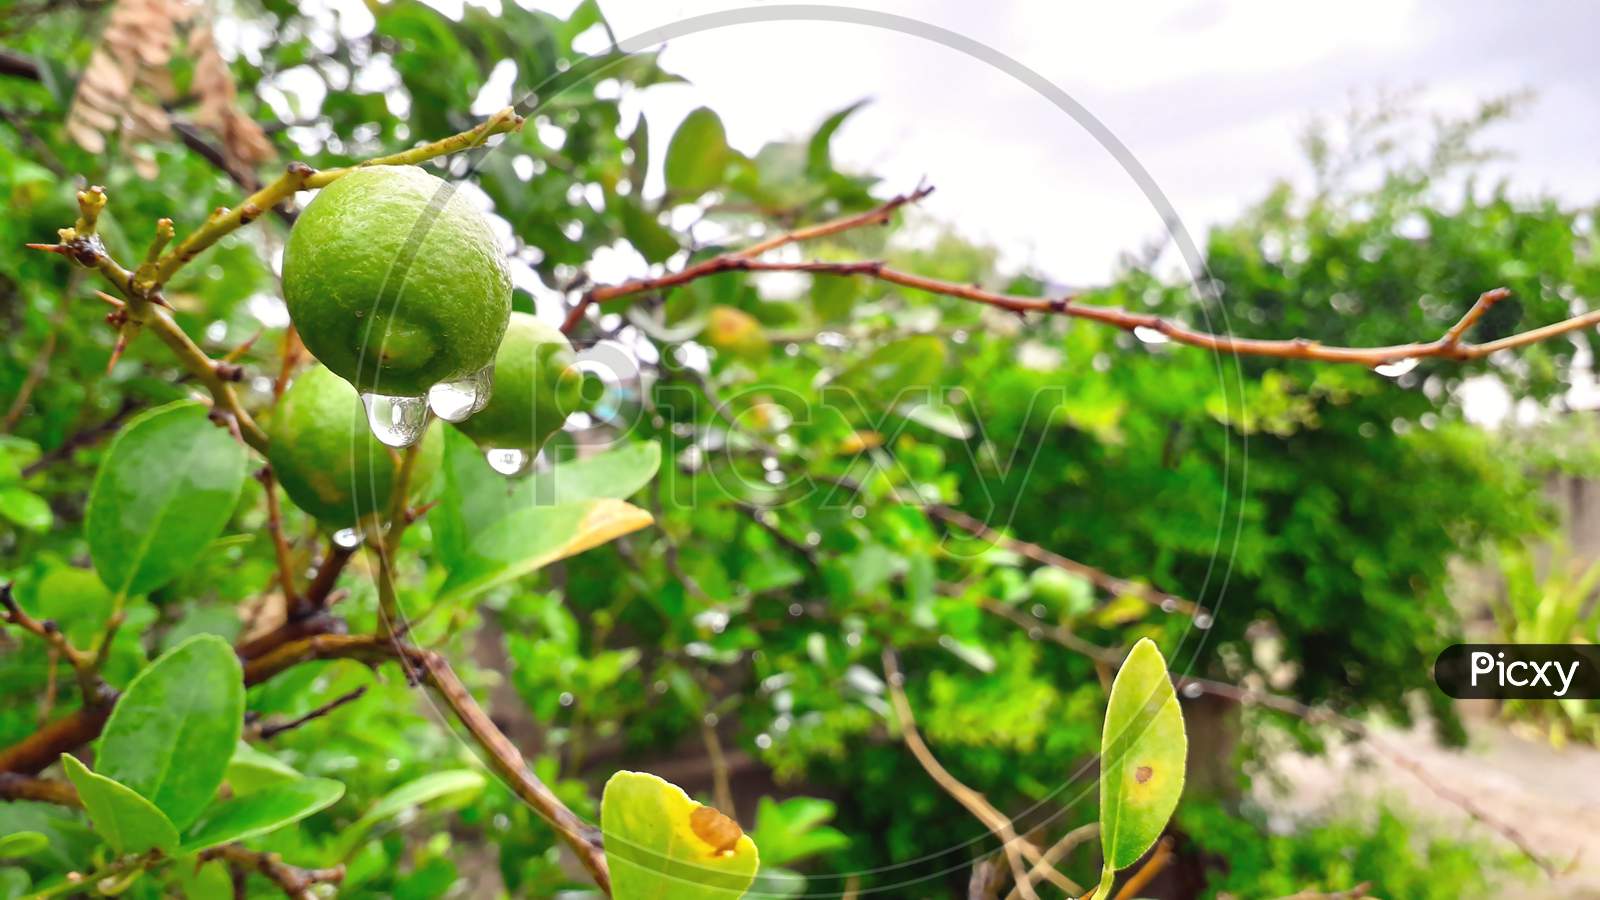 Green Raw Lemon Hanging On Branch With Water Drops In Rain